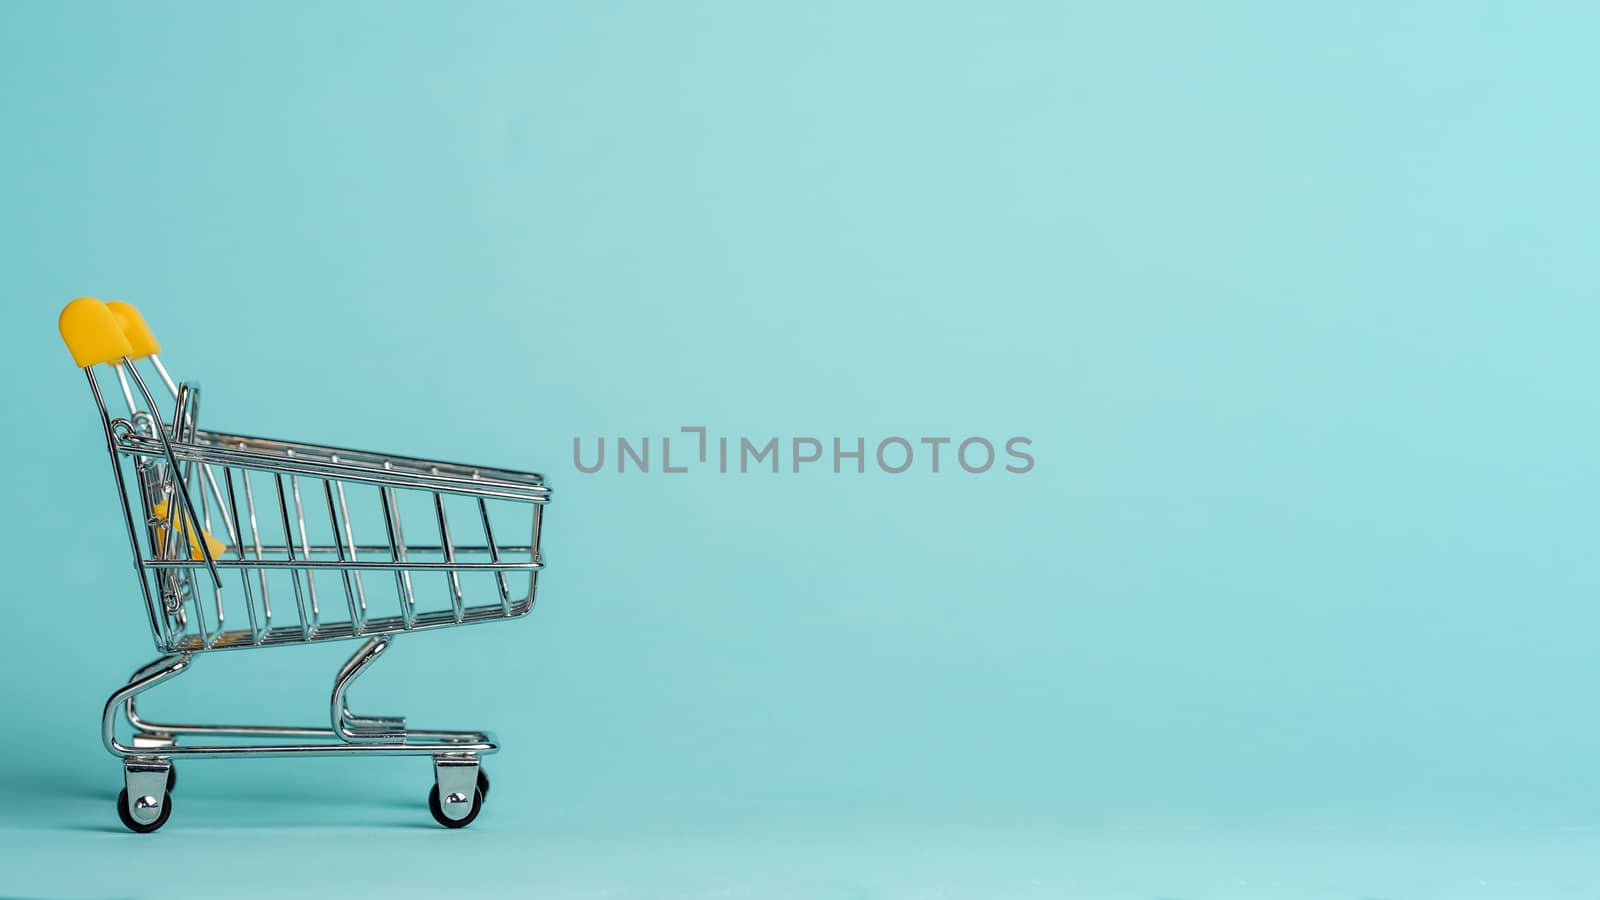 Shopping cart on blue background. Shop trolley at supermarket as sale, discount, shopaholism concept with copy space for text or design.